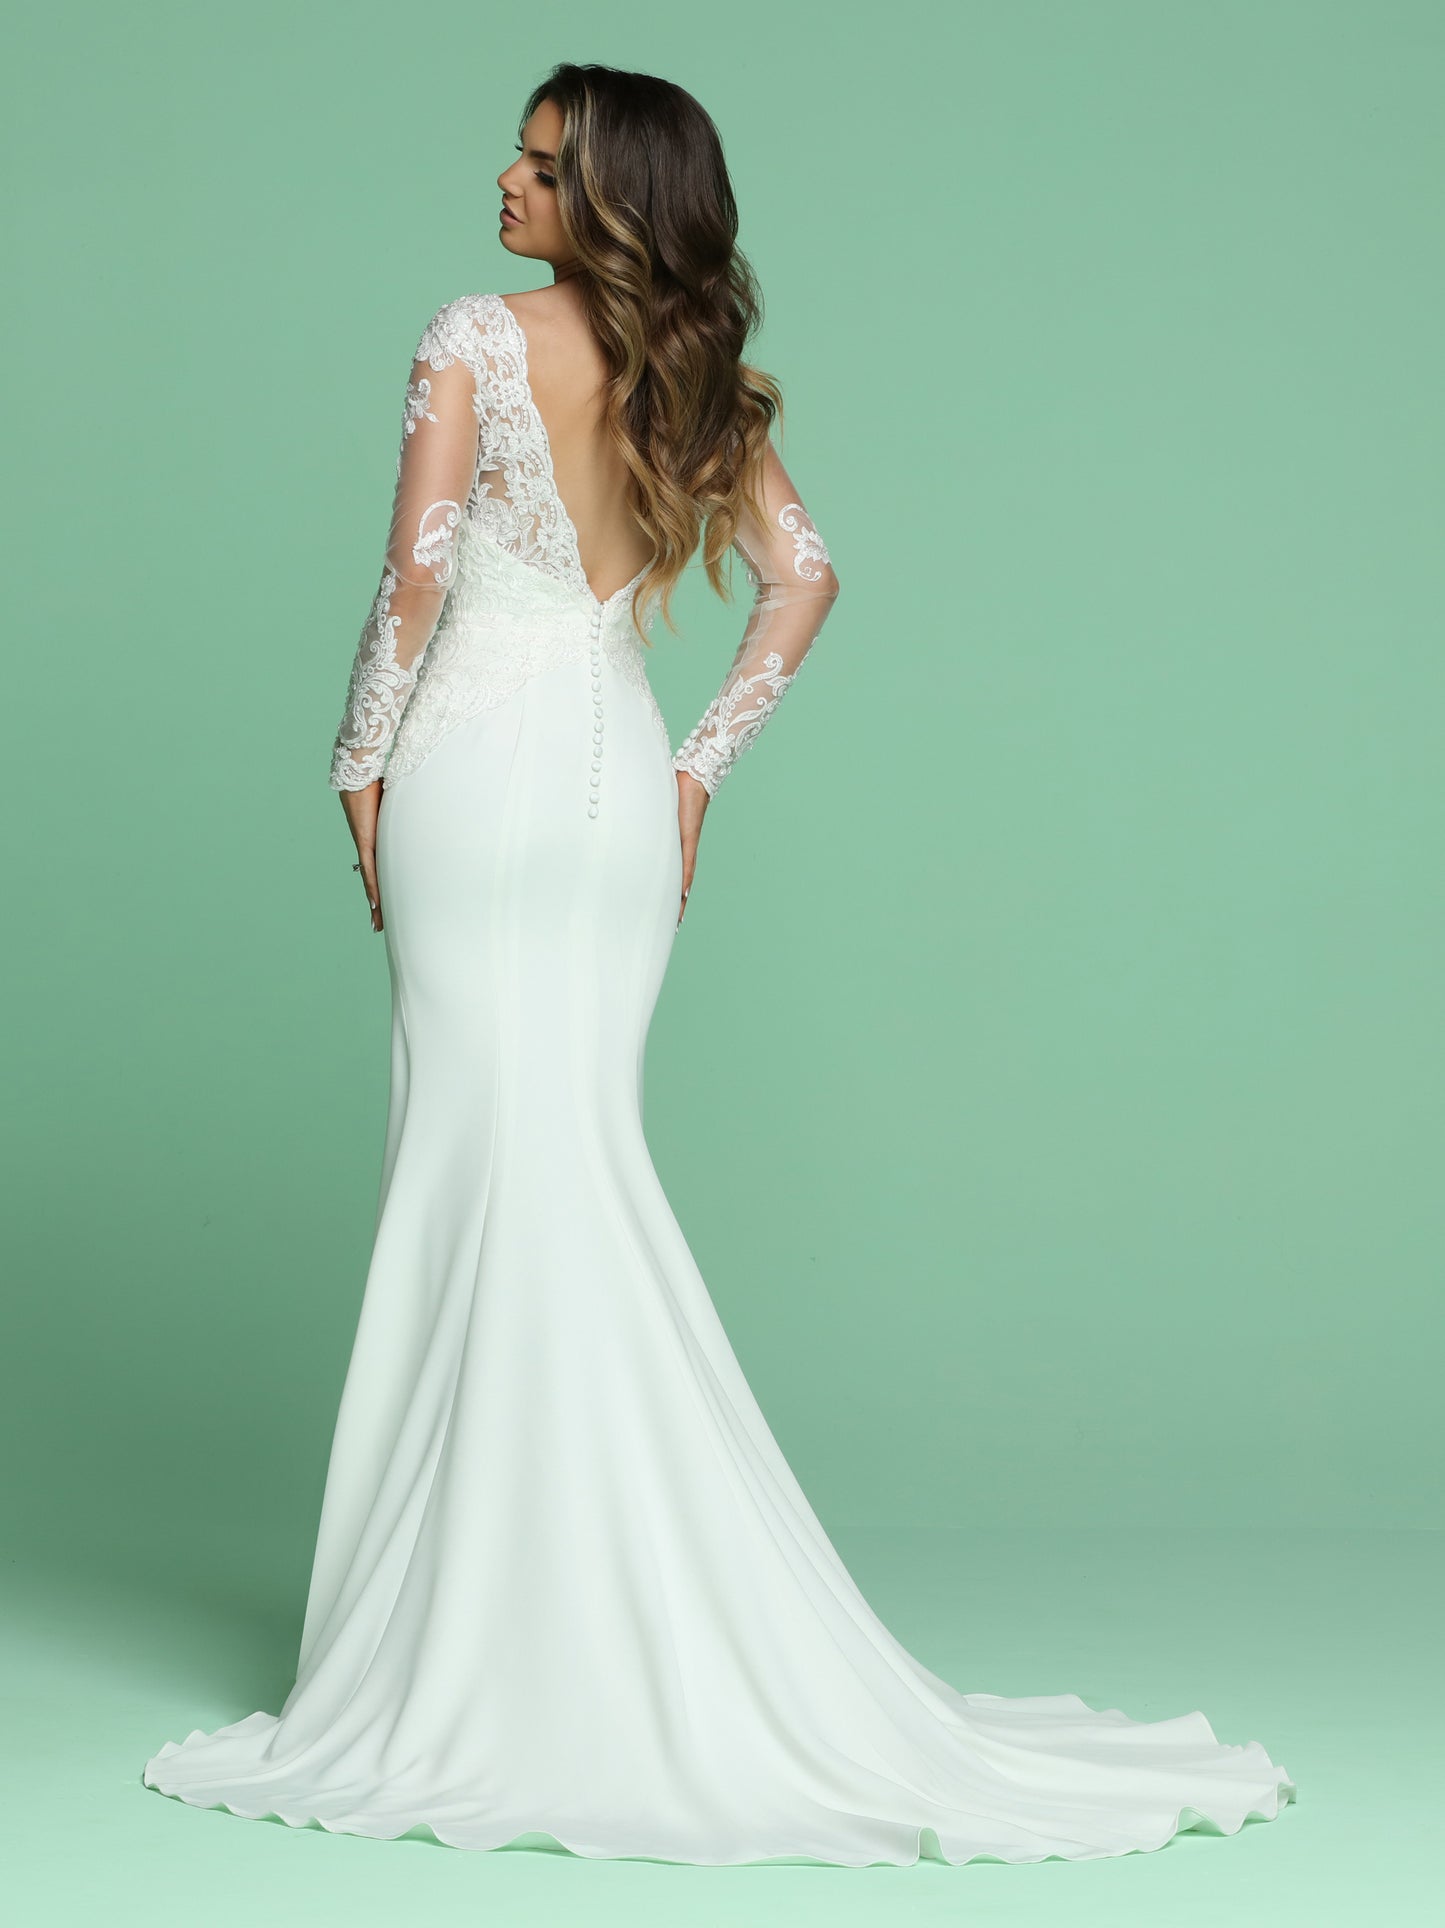 Davinci Bridal 50610 is a Beautiful Embellished Lace Sheer Long Sleeve Bridal Gown Featuring a V neckline with a Crystal & Beaded Fitted Lace Bodice and open V back with buttons running down the hips. Crepe Skirt flowing into a sweeping train.   Available for 1-2 Week Delivery!!!  Available Sizes: 2,4,6,8,10,12,14,16,18,20  Available Colors: Ivory  Available Sizes: 2-30